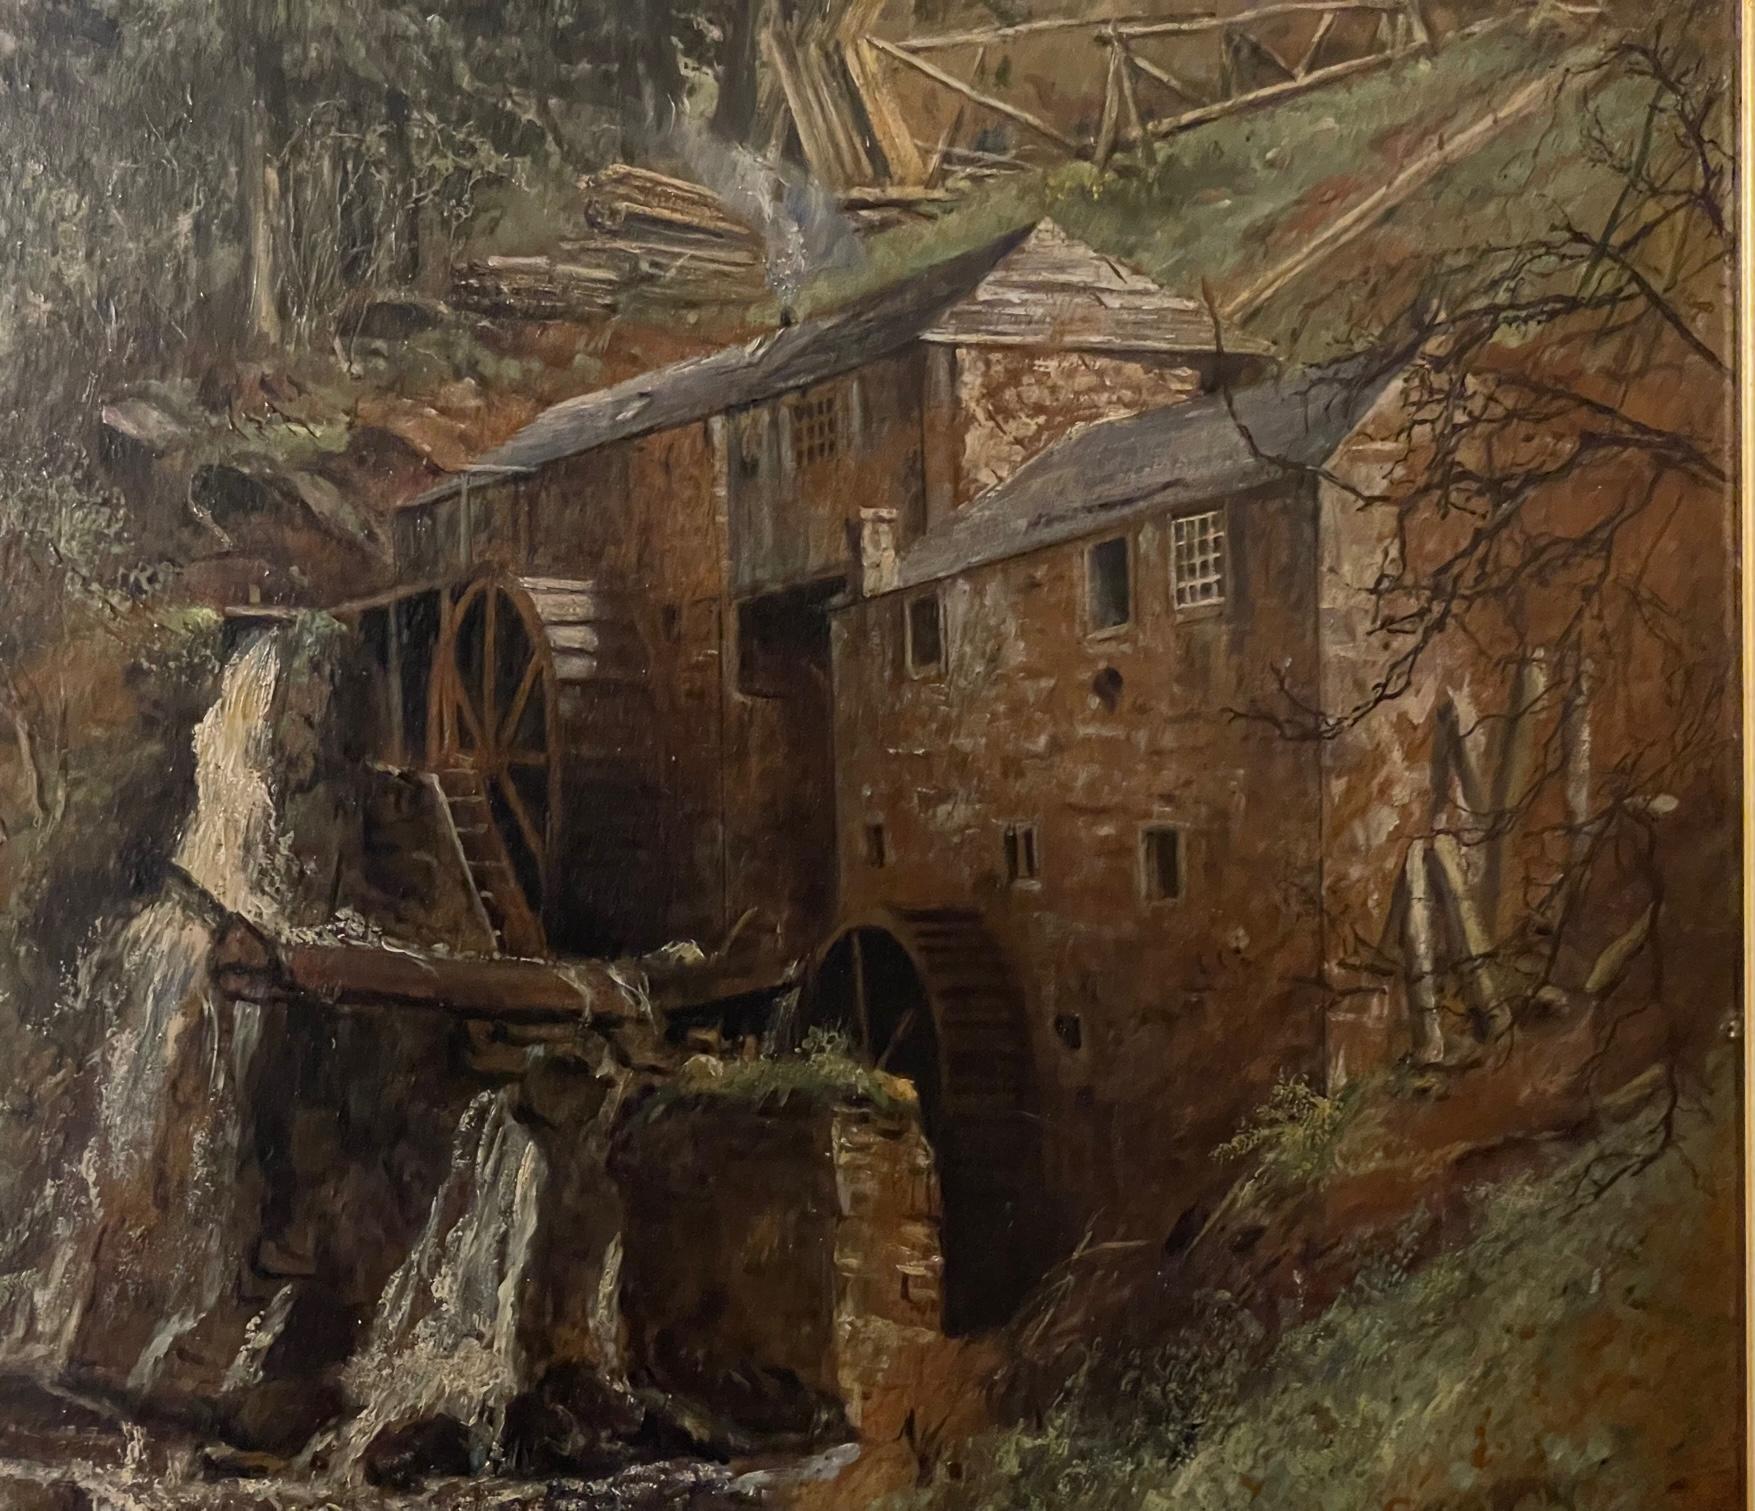 The Old Mill is a 19th century oil painting on board by Scottish artist Colin Hunter, (1841-1904). Hunter was a member of the Royal Academy with the title ARA on the nameplate of this work. Born in Glasgow, Hunter lived by the Clyde River where he